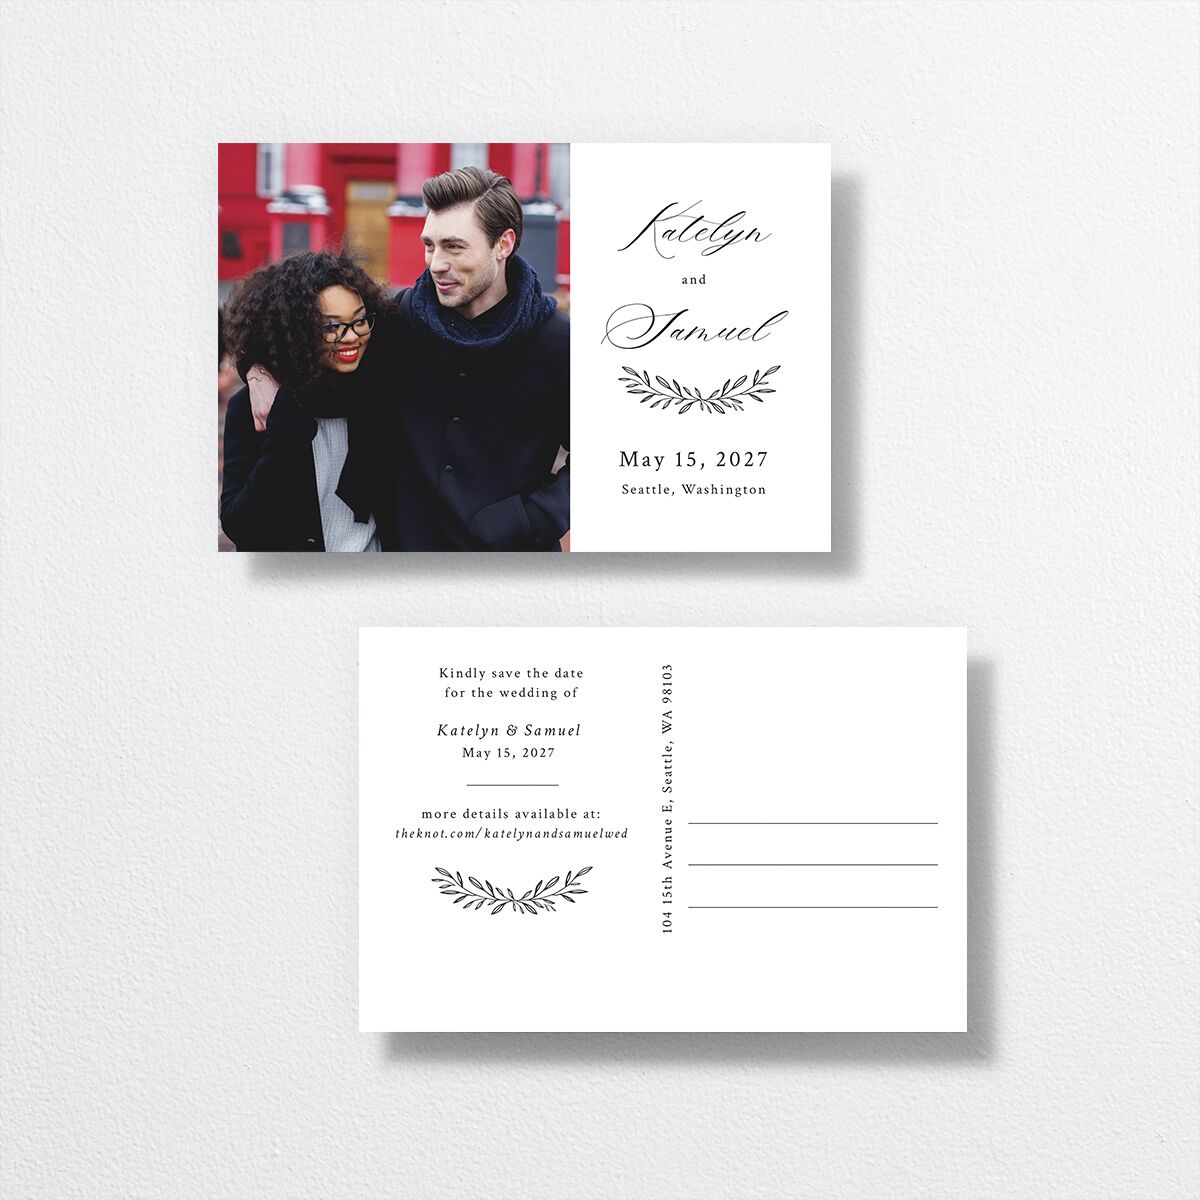 Monogram Wreath Save The Date Postcards front-and-back in black